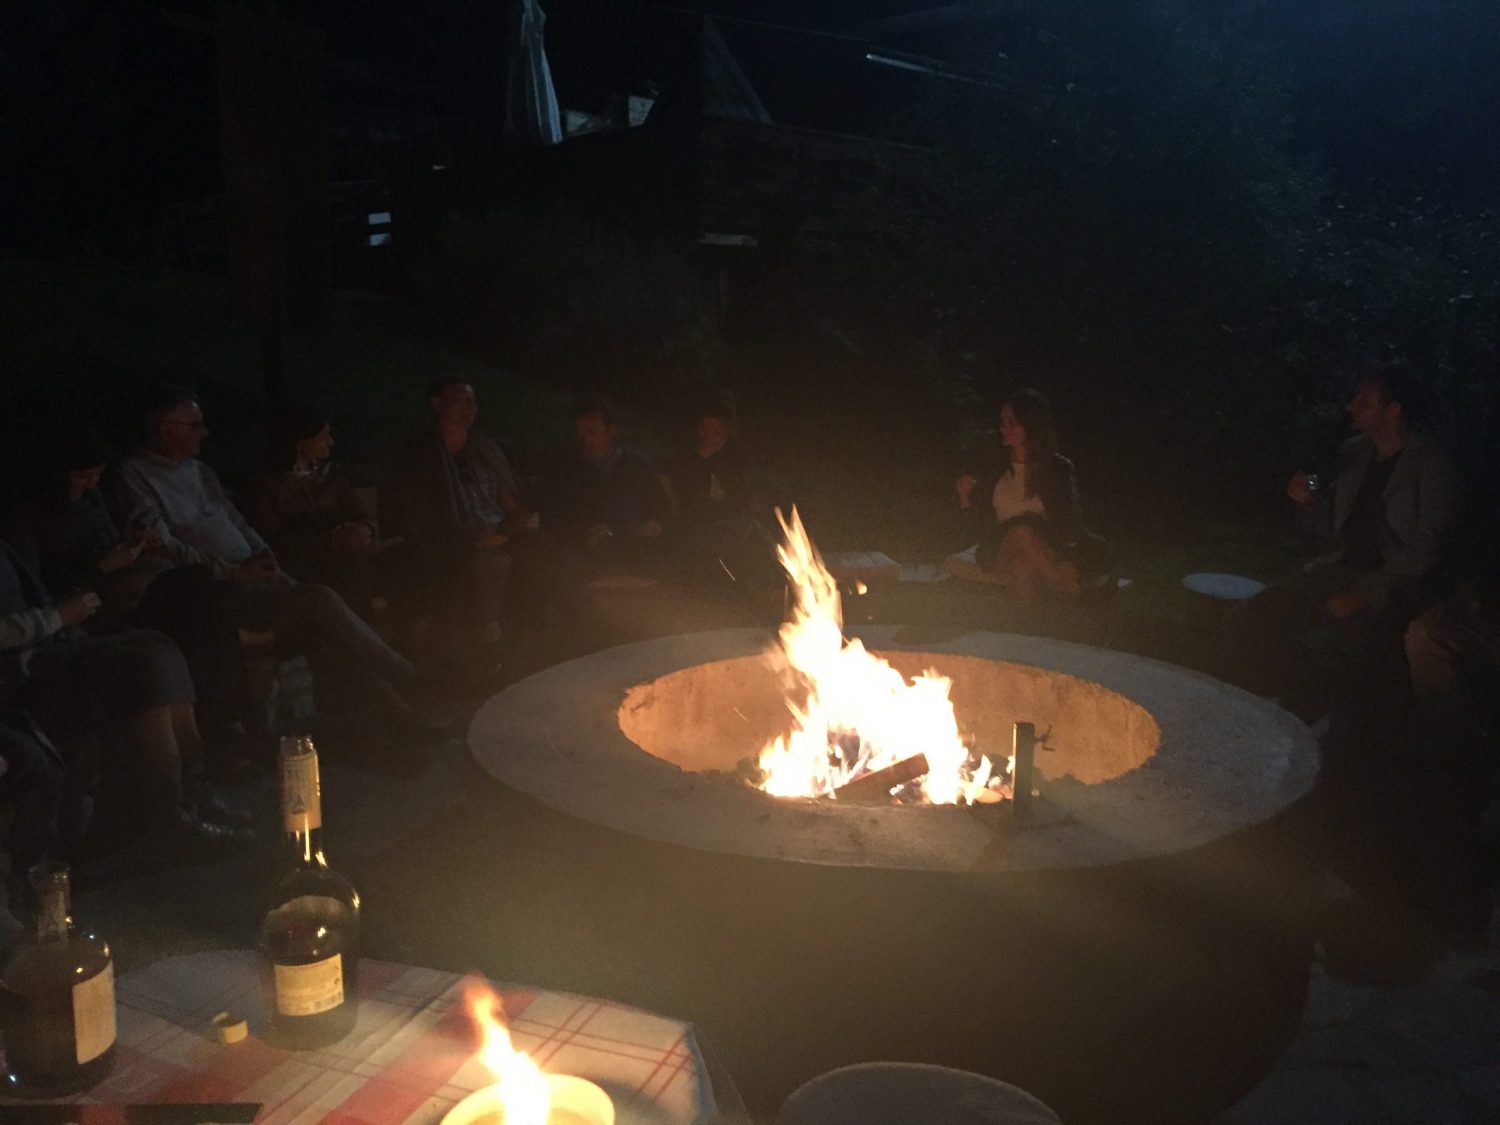 A fire pit in the garden of the Ciasa Salares while we were tasting the different aguardientes (schnapps). Book your stay at the Ciasa Salares here. Planning your summer in the mountains of Alta Badia.